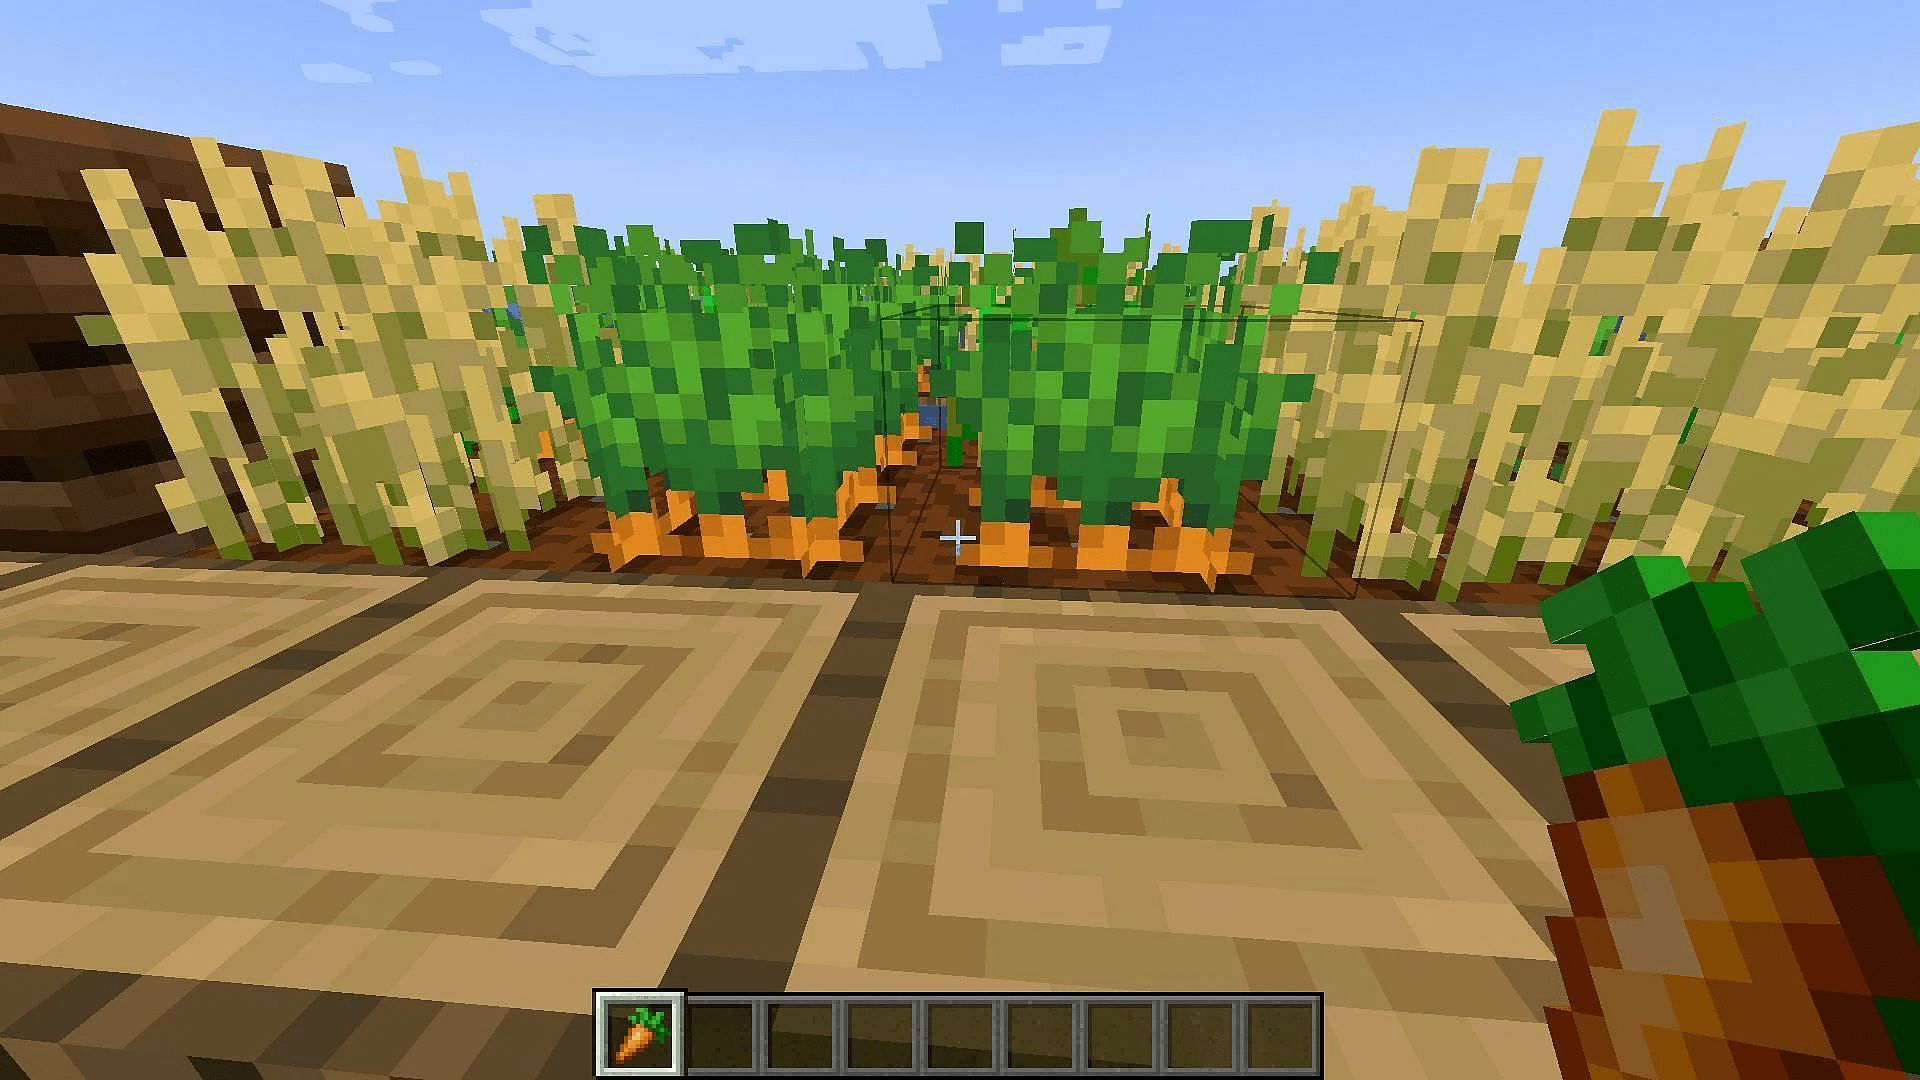 Villager farms are a reliable way to find carrots in the game (Image via Mojang)